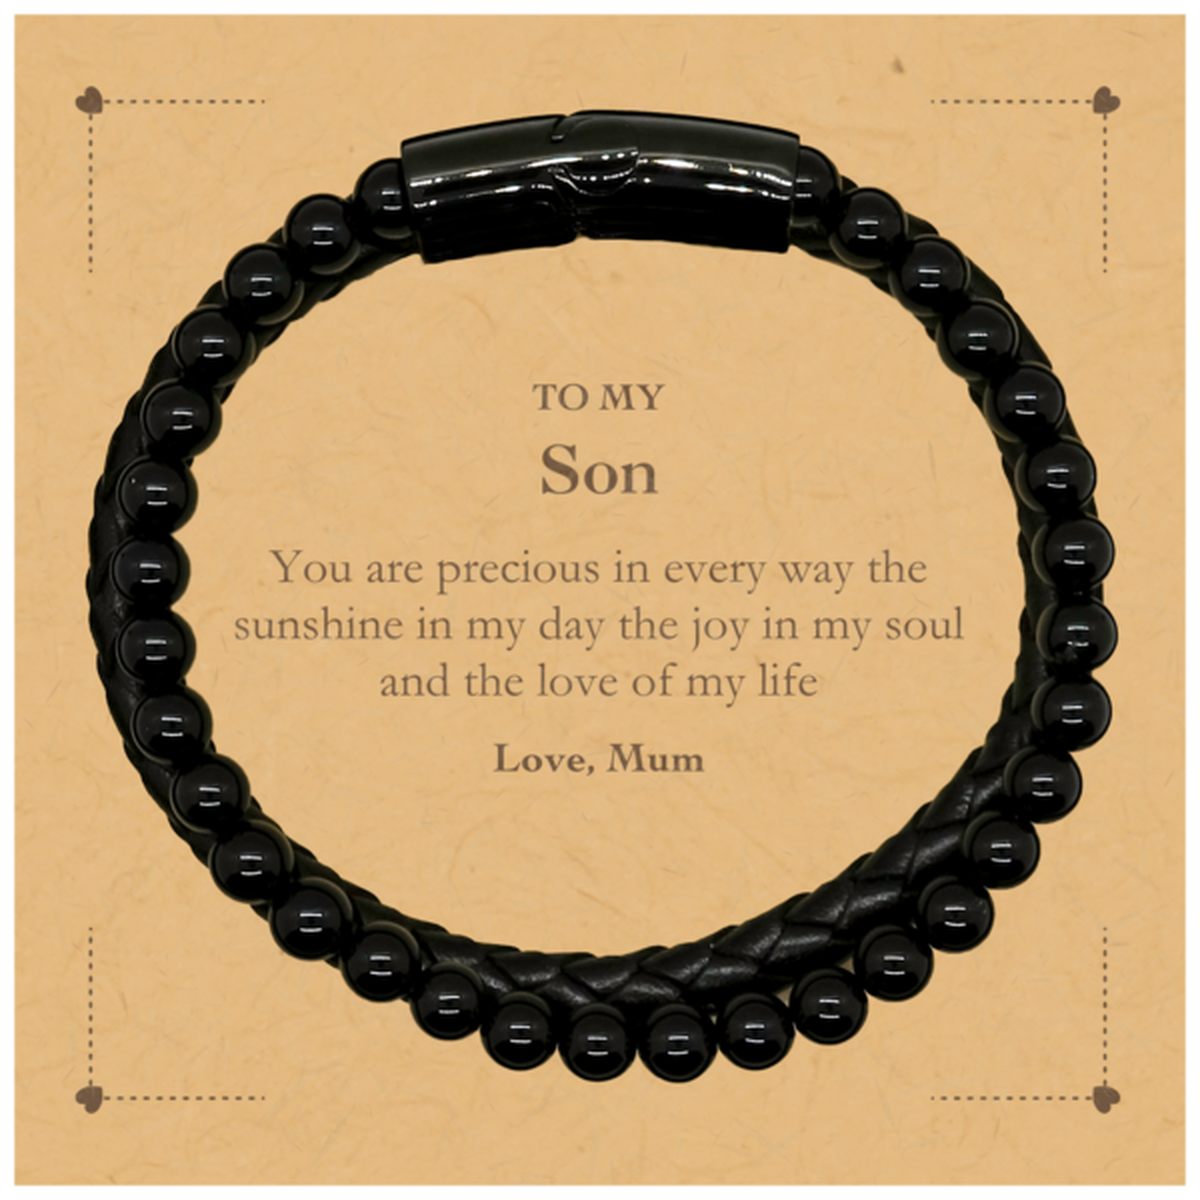 Graduation Gifts for Son Stone Leather Bracelets Present from Mum, Christmas Son Birthday Gifts Son You are precious in every way the sunshine in my day. Love, Mum